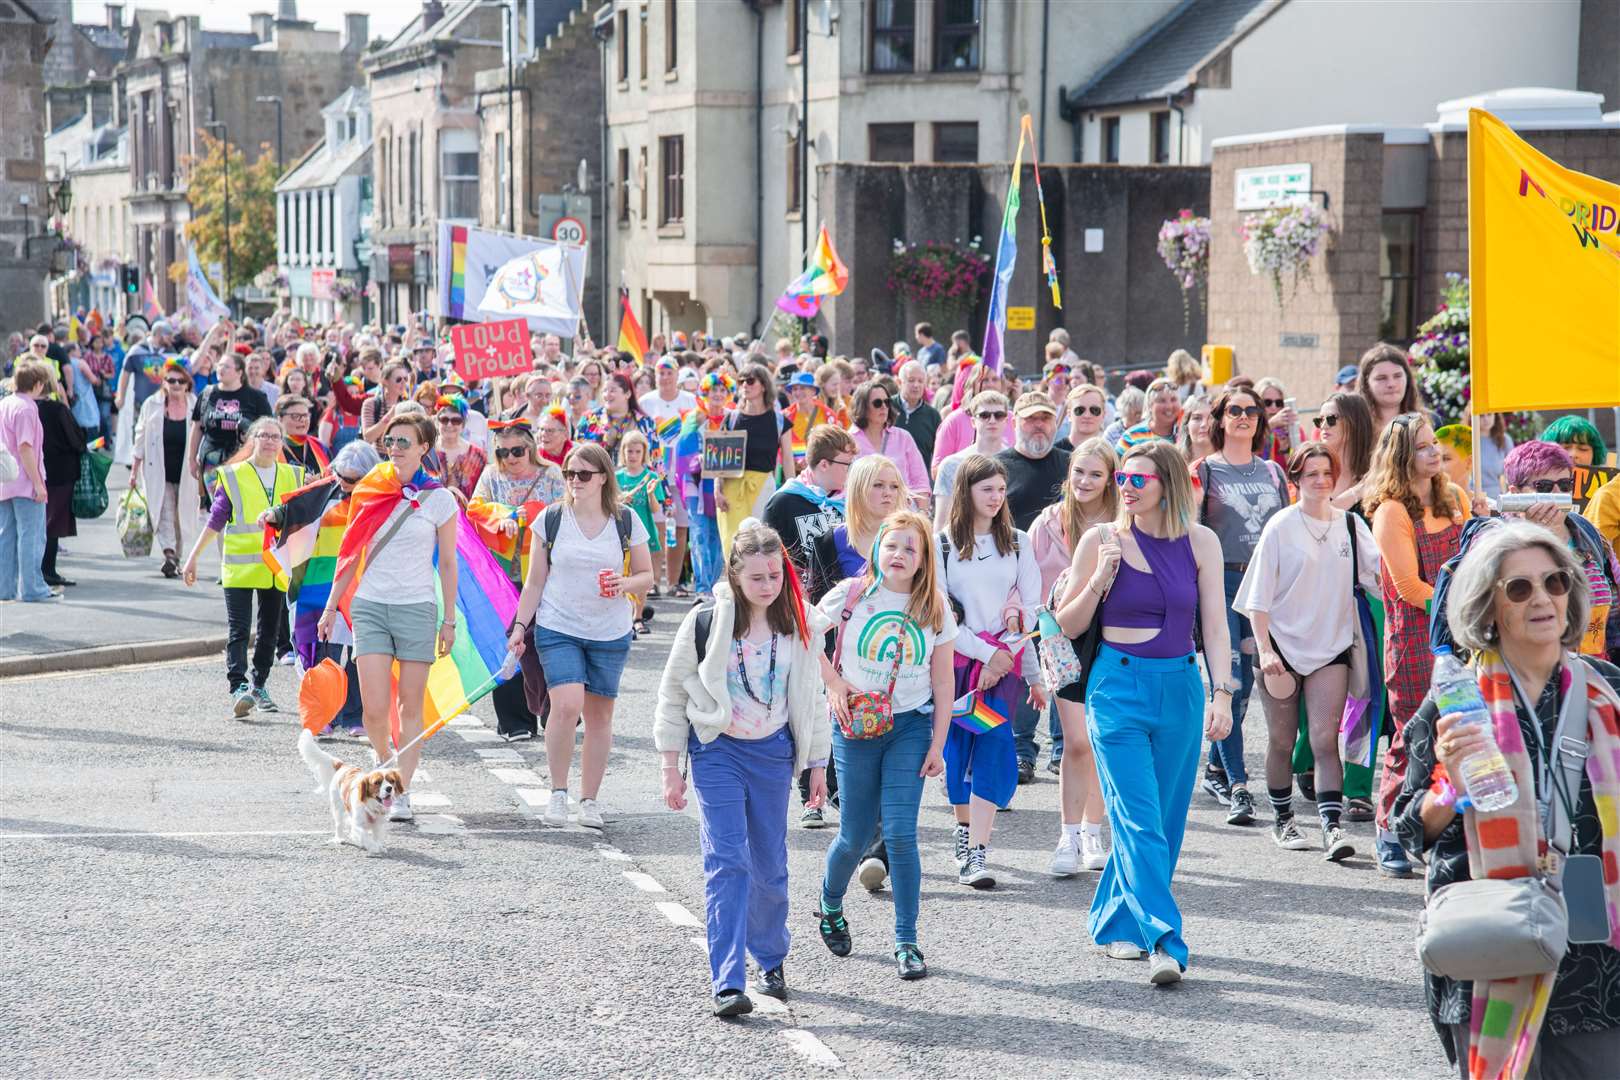 Passing Forres House Community Centre during the procession to Grant Park. Picture: Daniel Forsyth